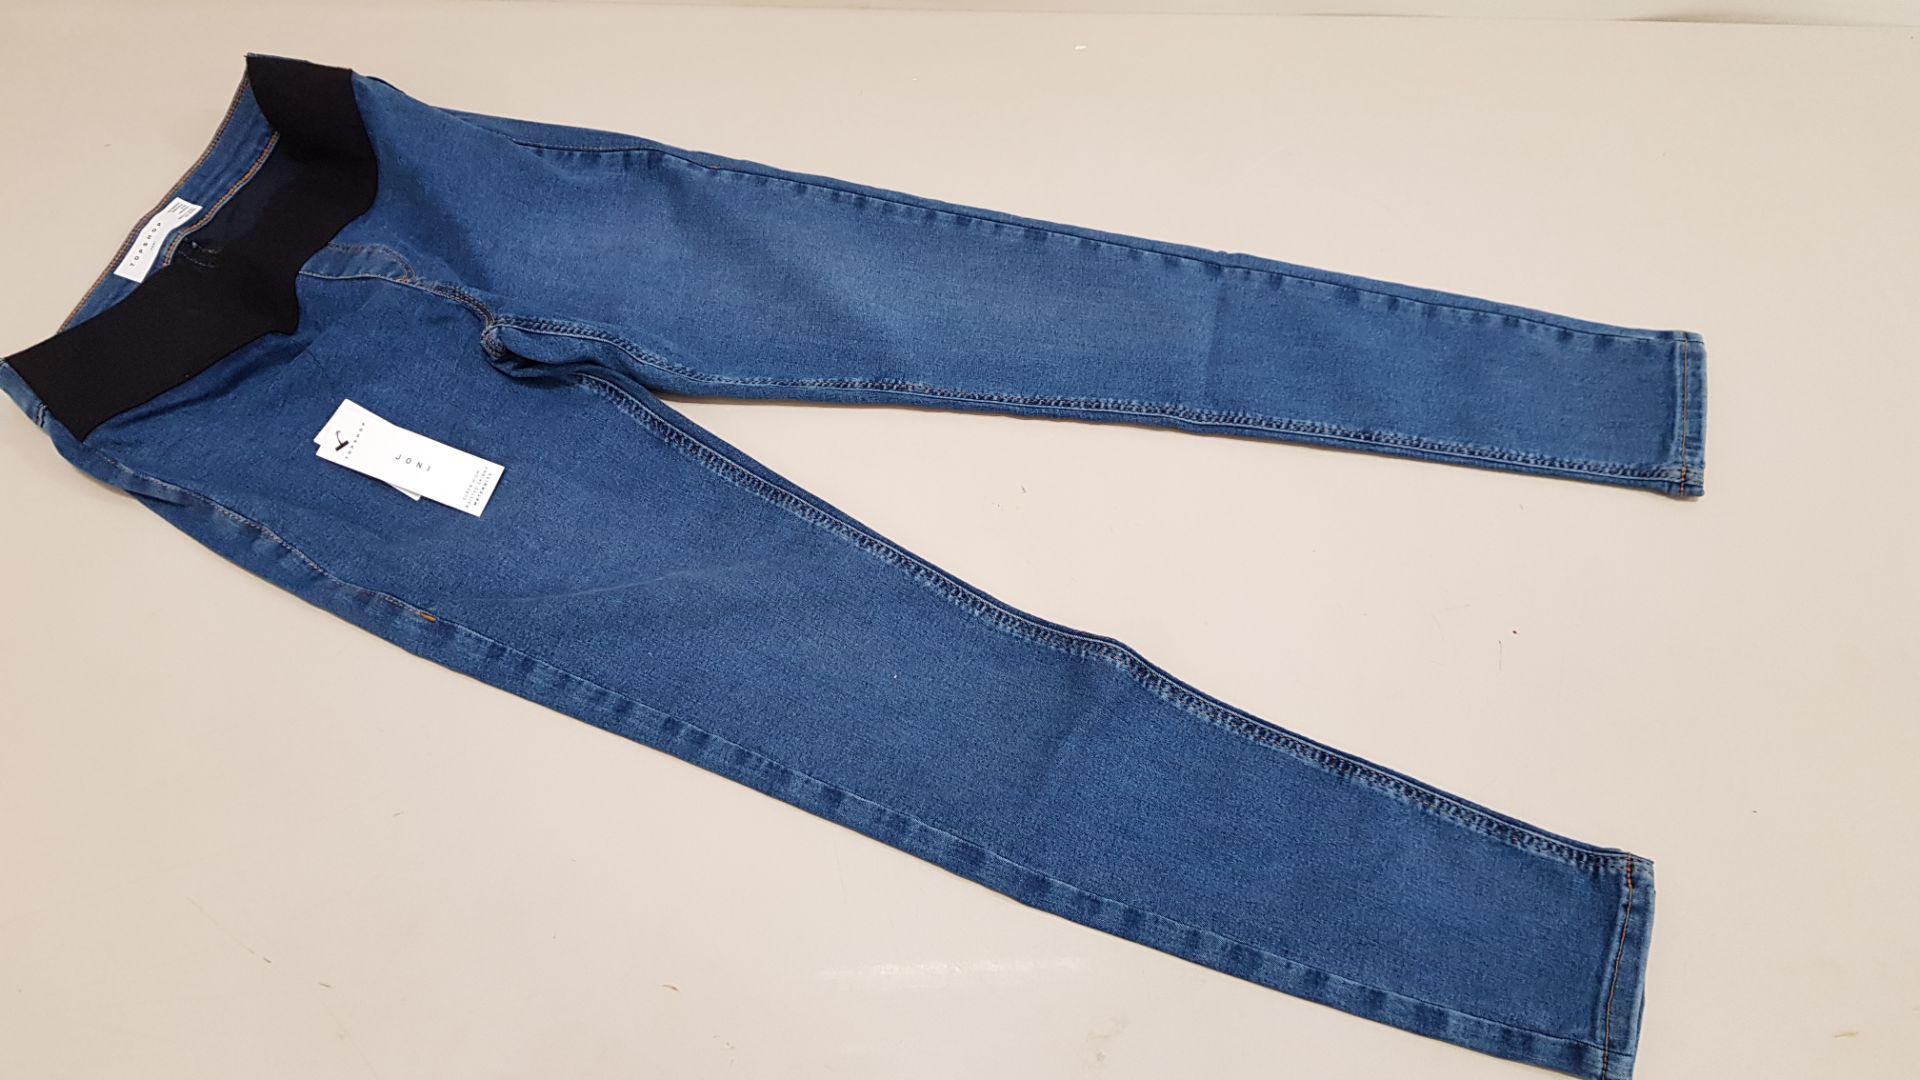 10 X BRAND NEW TOPSHOP JONI SUPER HIGH WAISTED SKINNY MATERNITY JEANS UK SIZE 8 RRP £36.00 (TOTAL